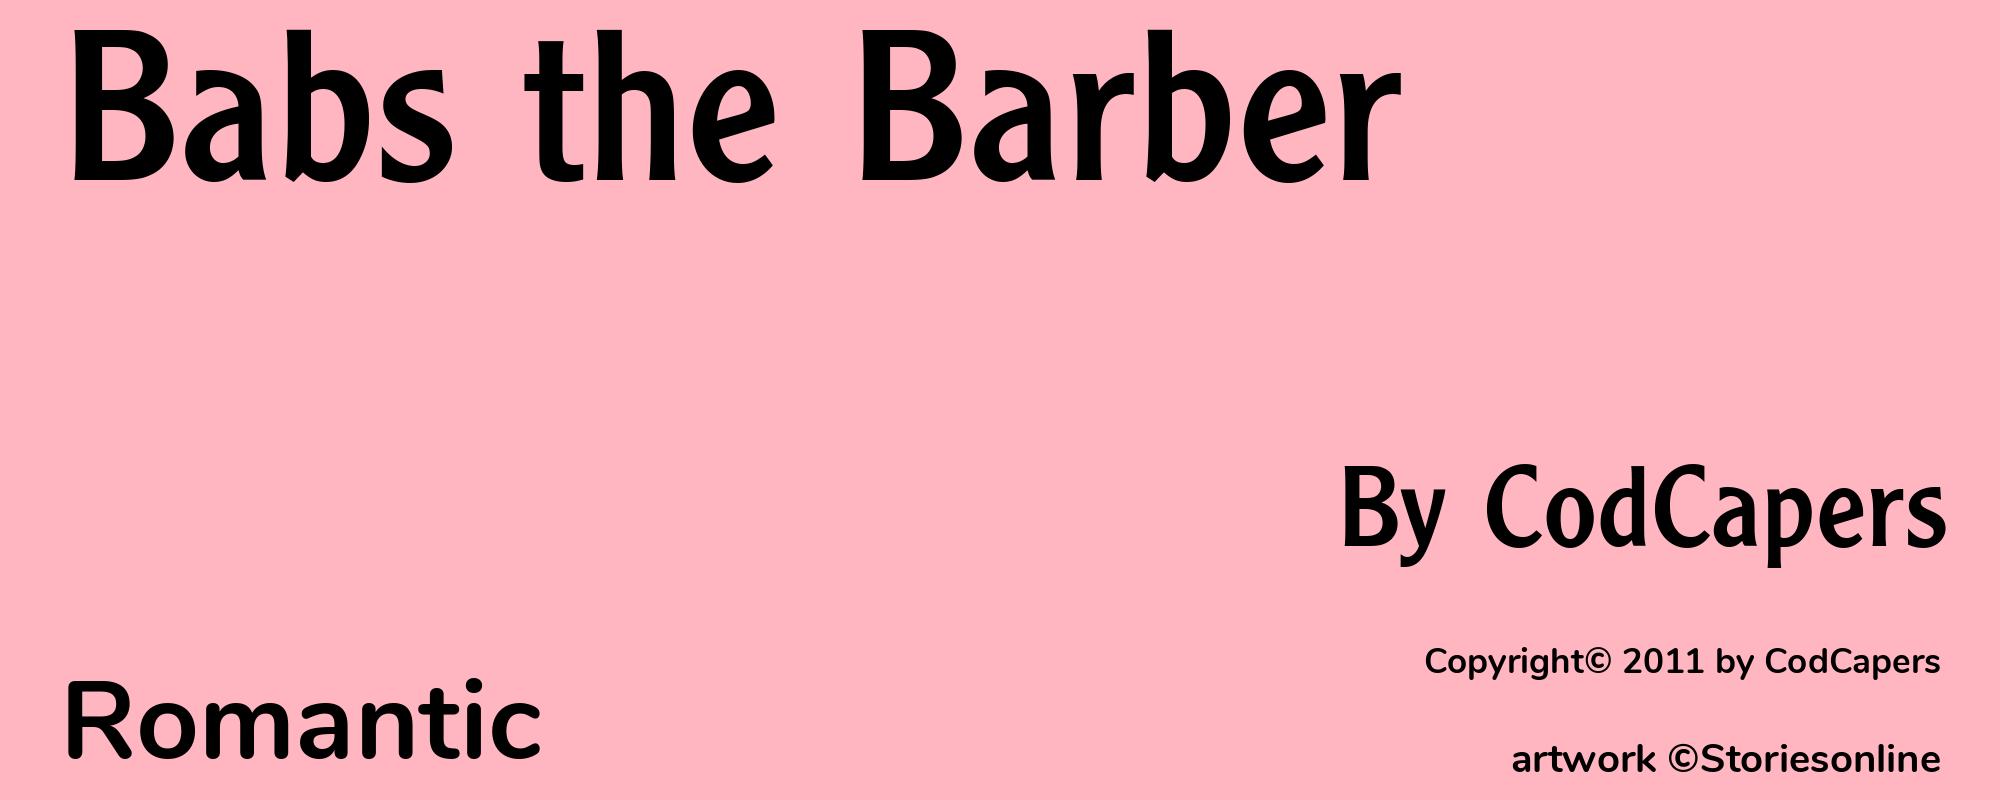 Babs the Barber - Cover